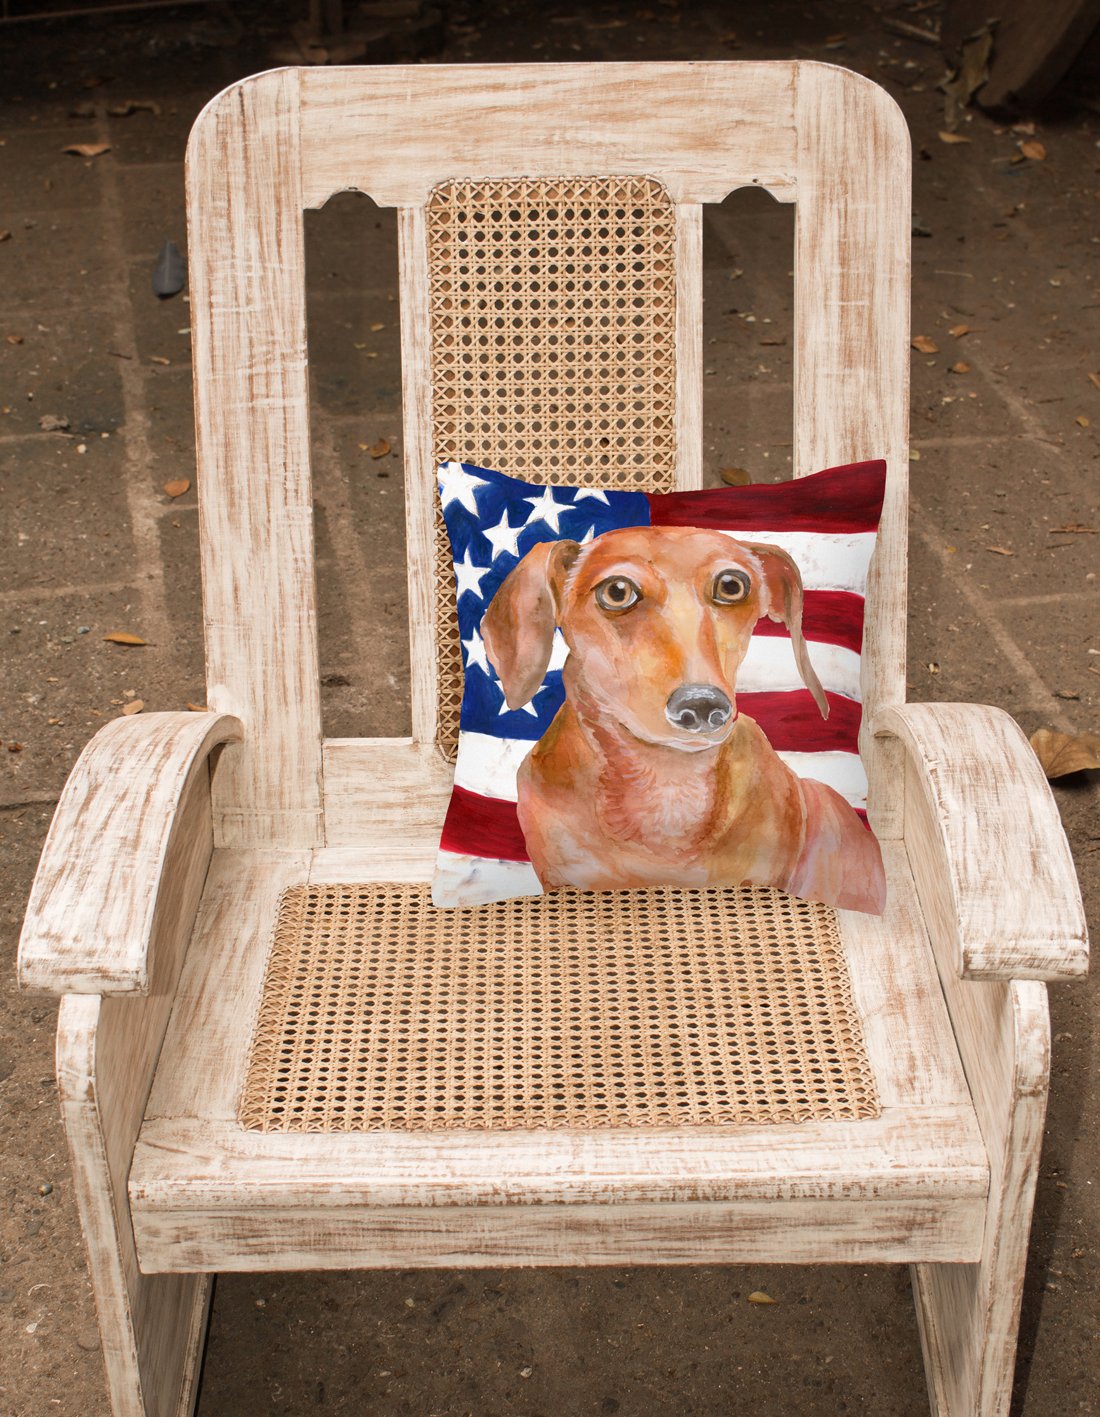 Red Dachshund Patriotic Fabric Decorative Pillow BB9707PW1818 by Caroline's Treasures